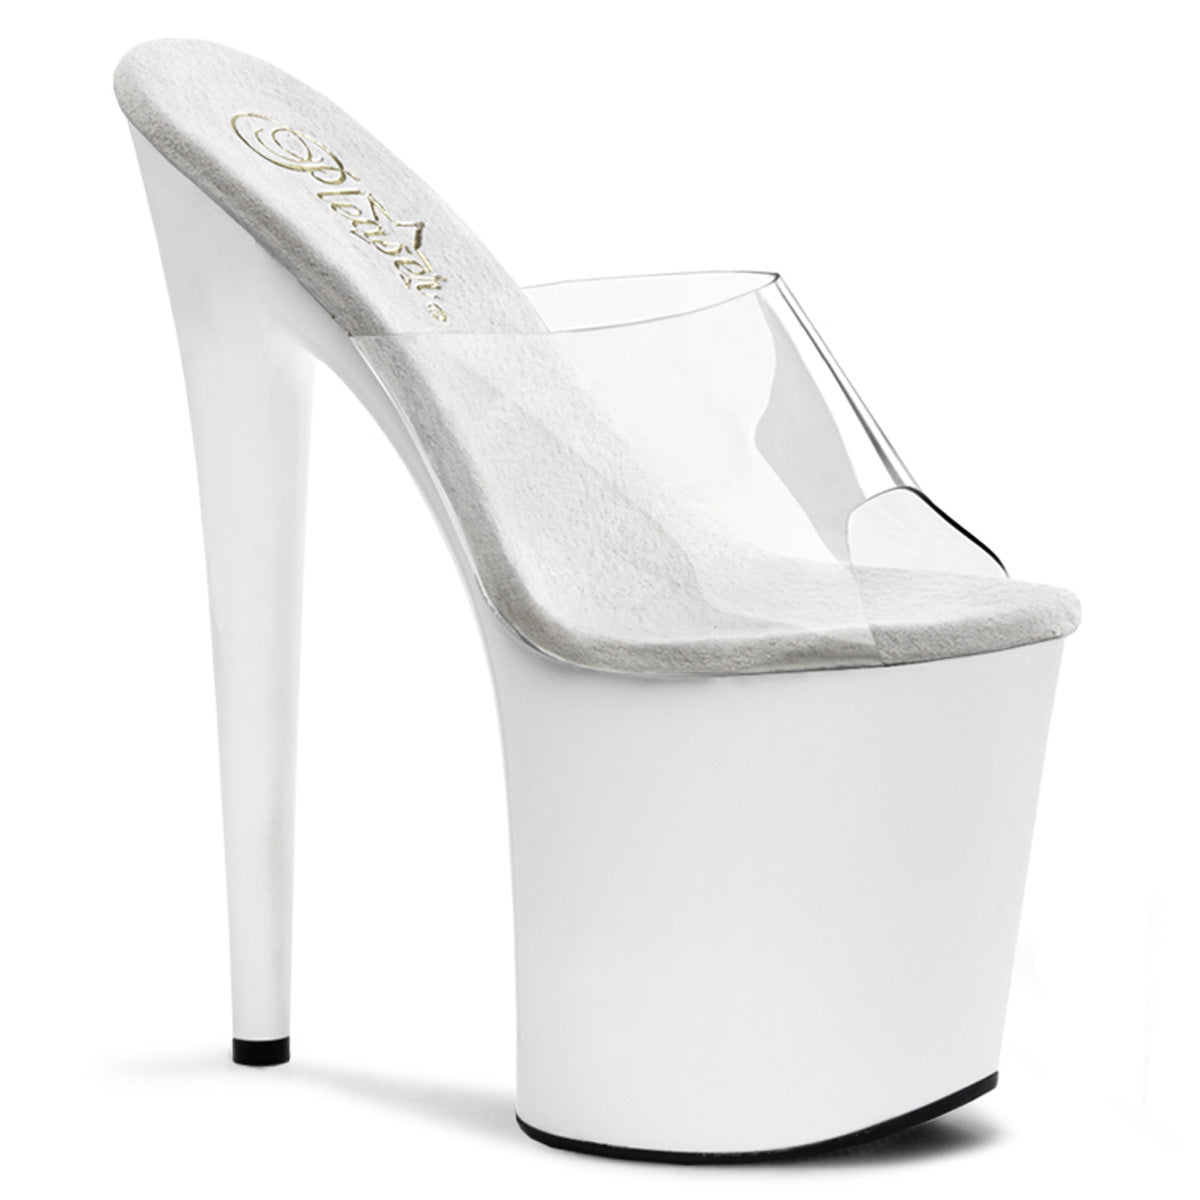 FLAMINGO-801 8" Heel Clear and White Pole Dancing Platforms-Pleaser- Sexy Shoes